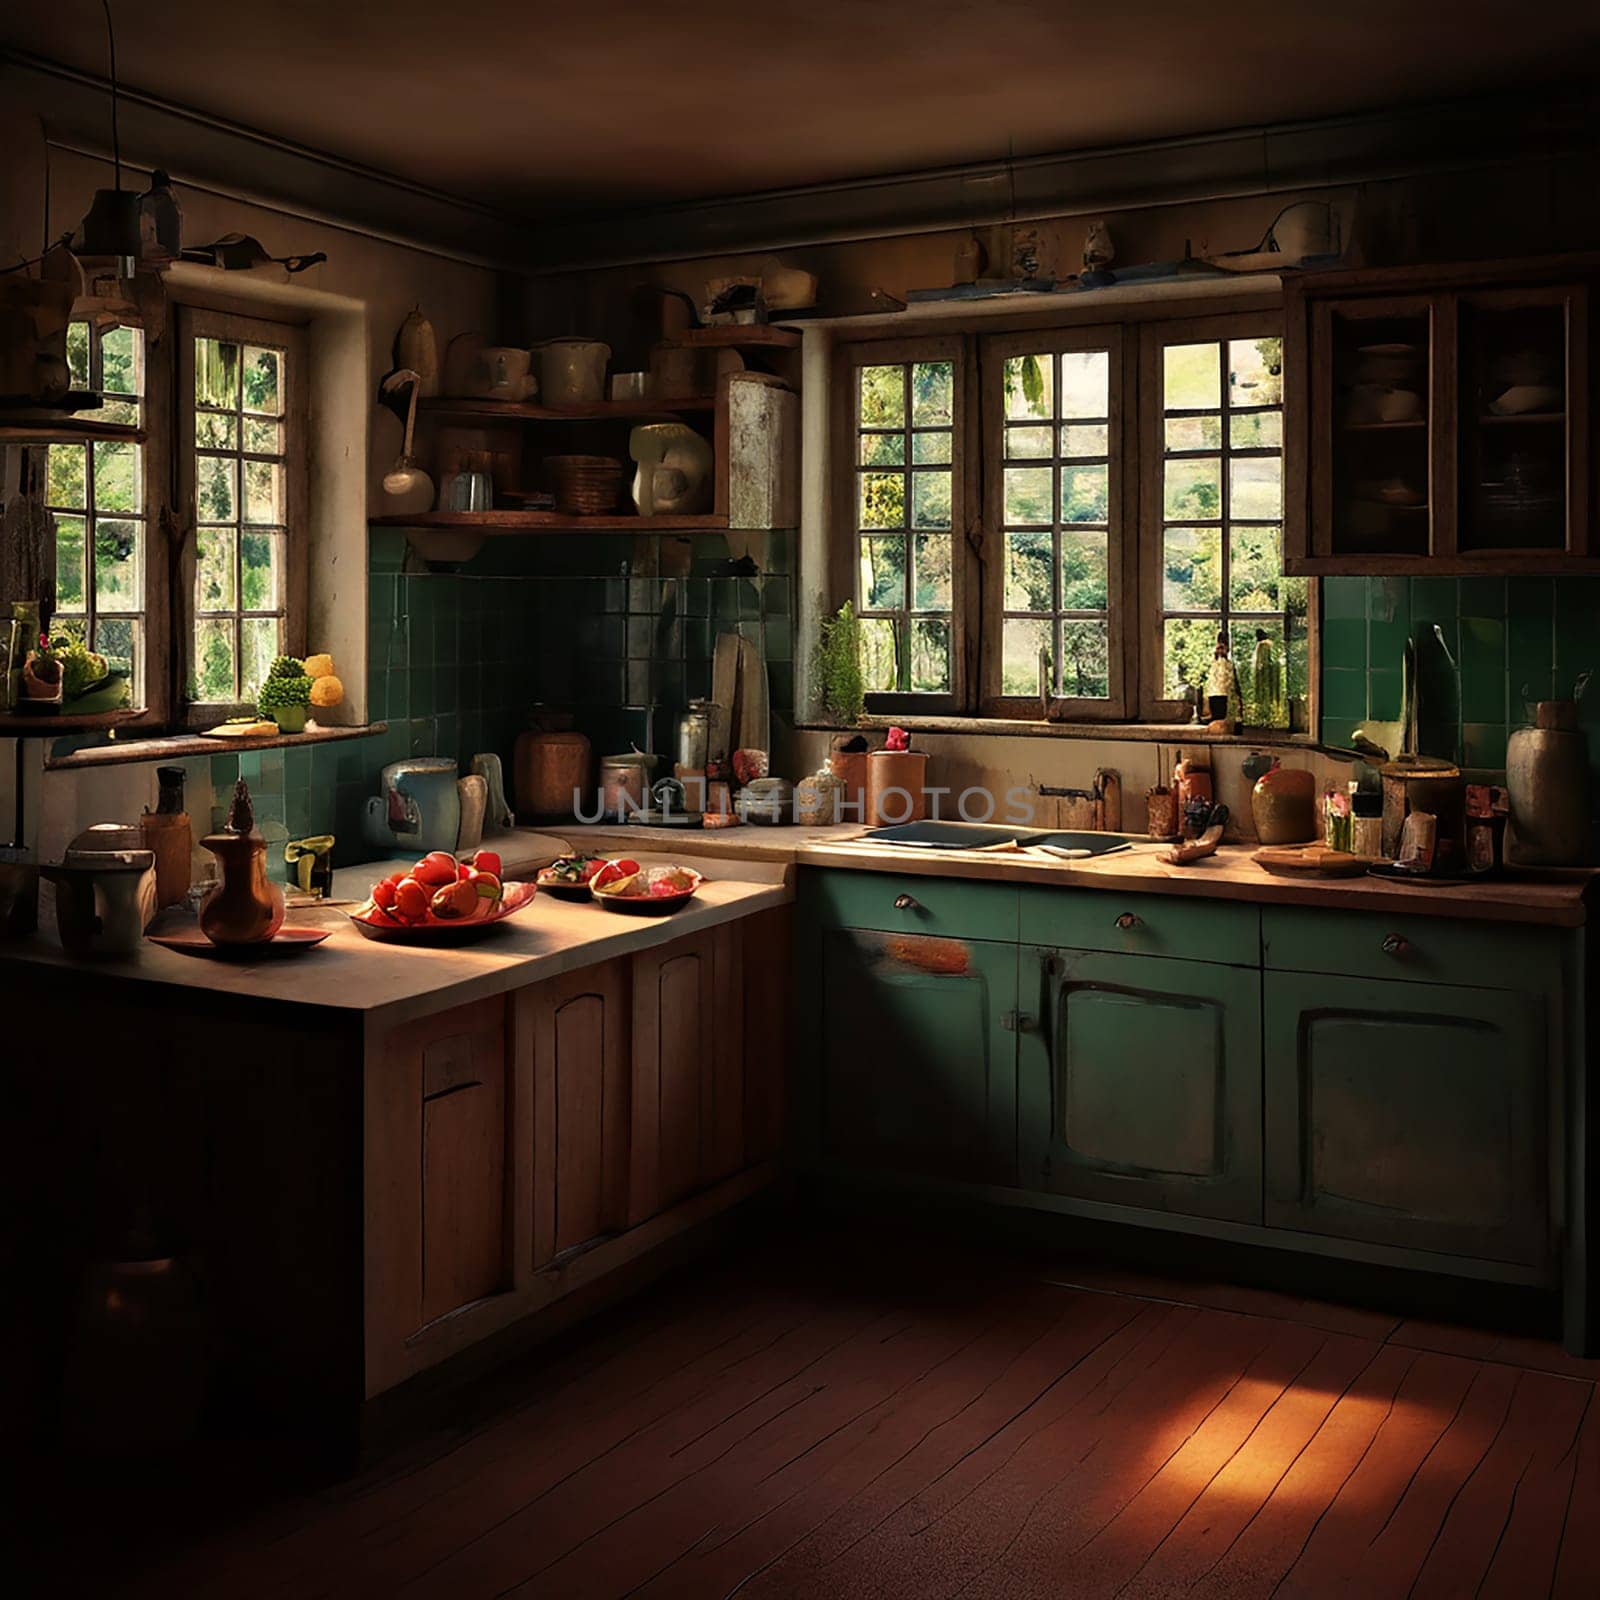 The Art of Kitchen Lighting: Illuminating Your Culinary Space